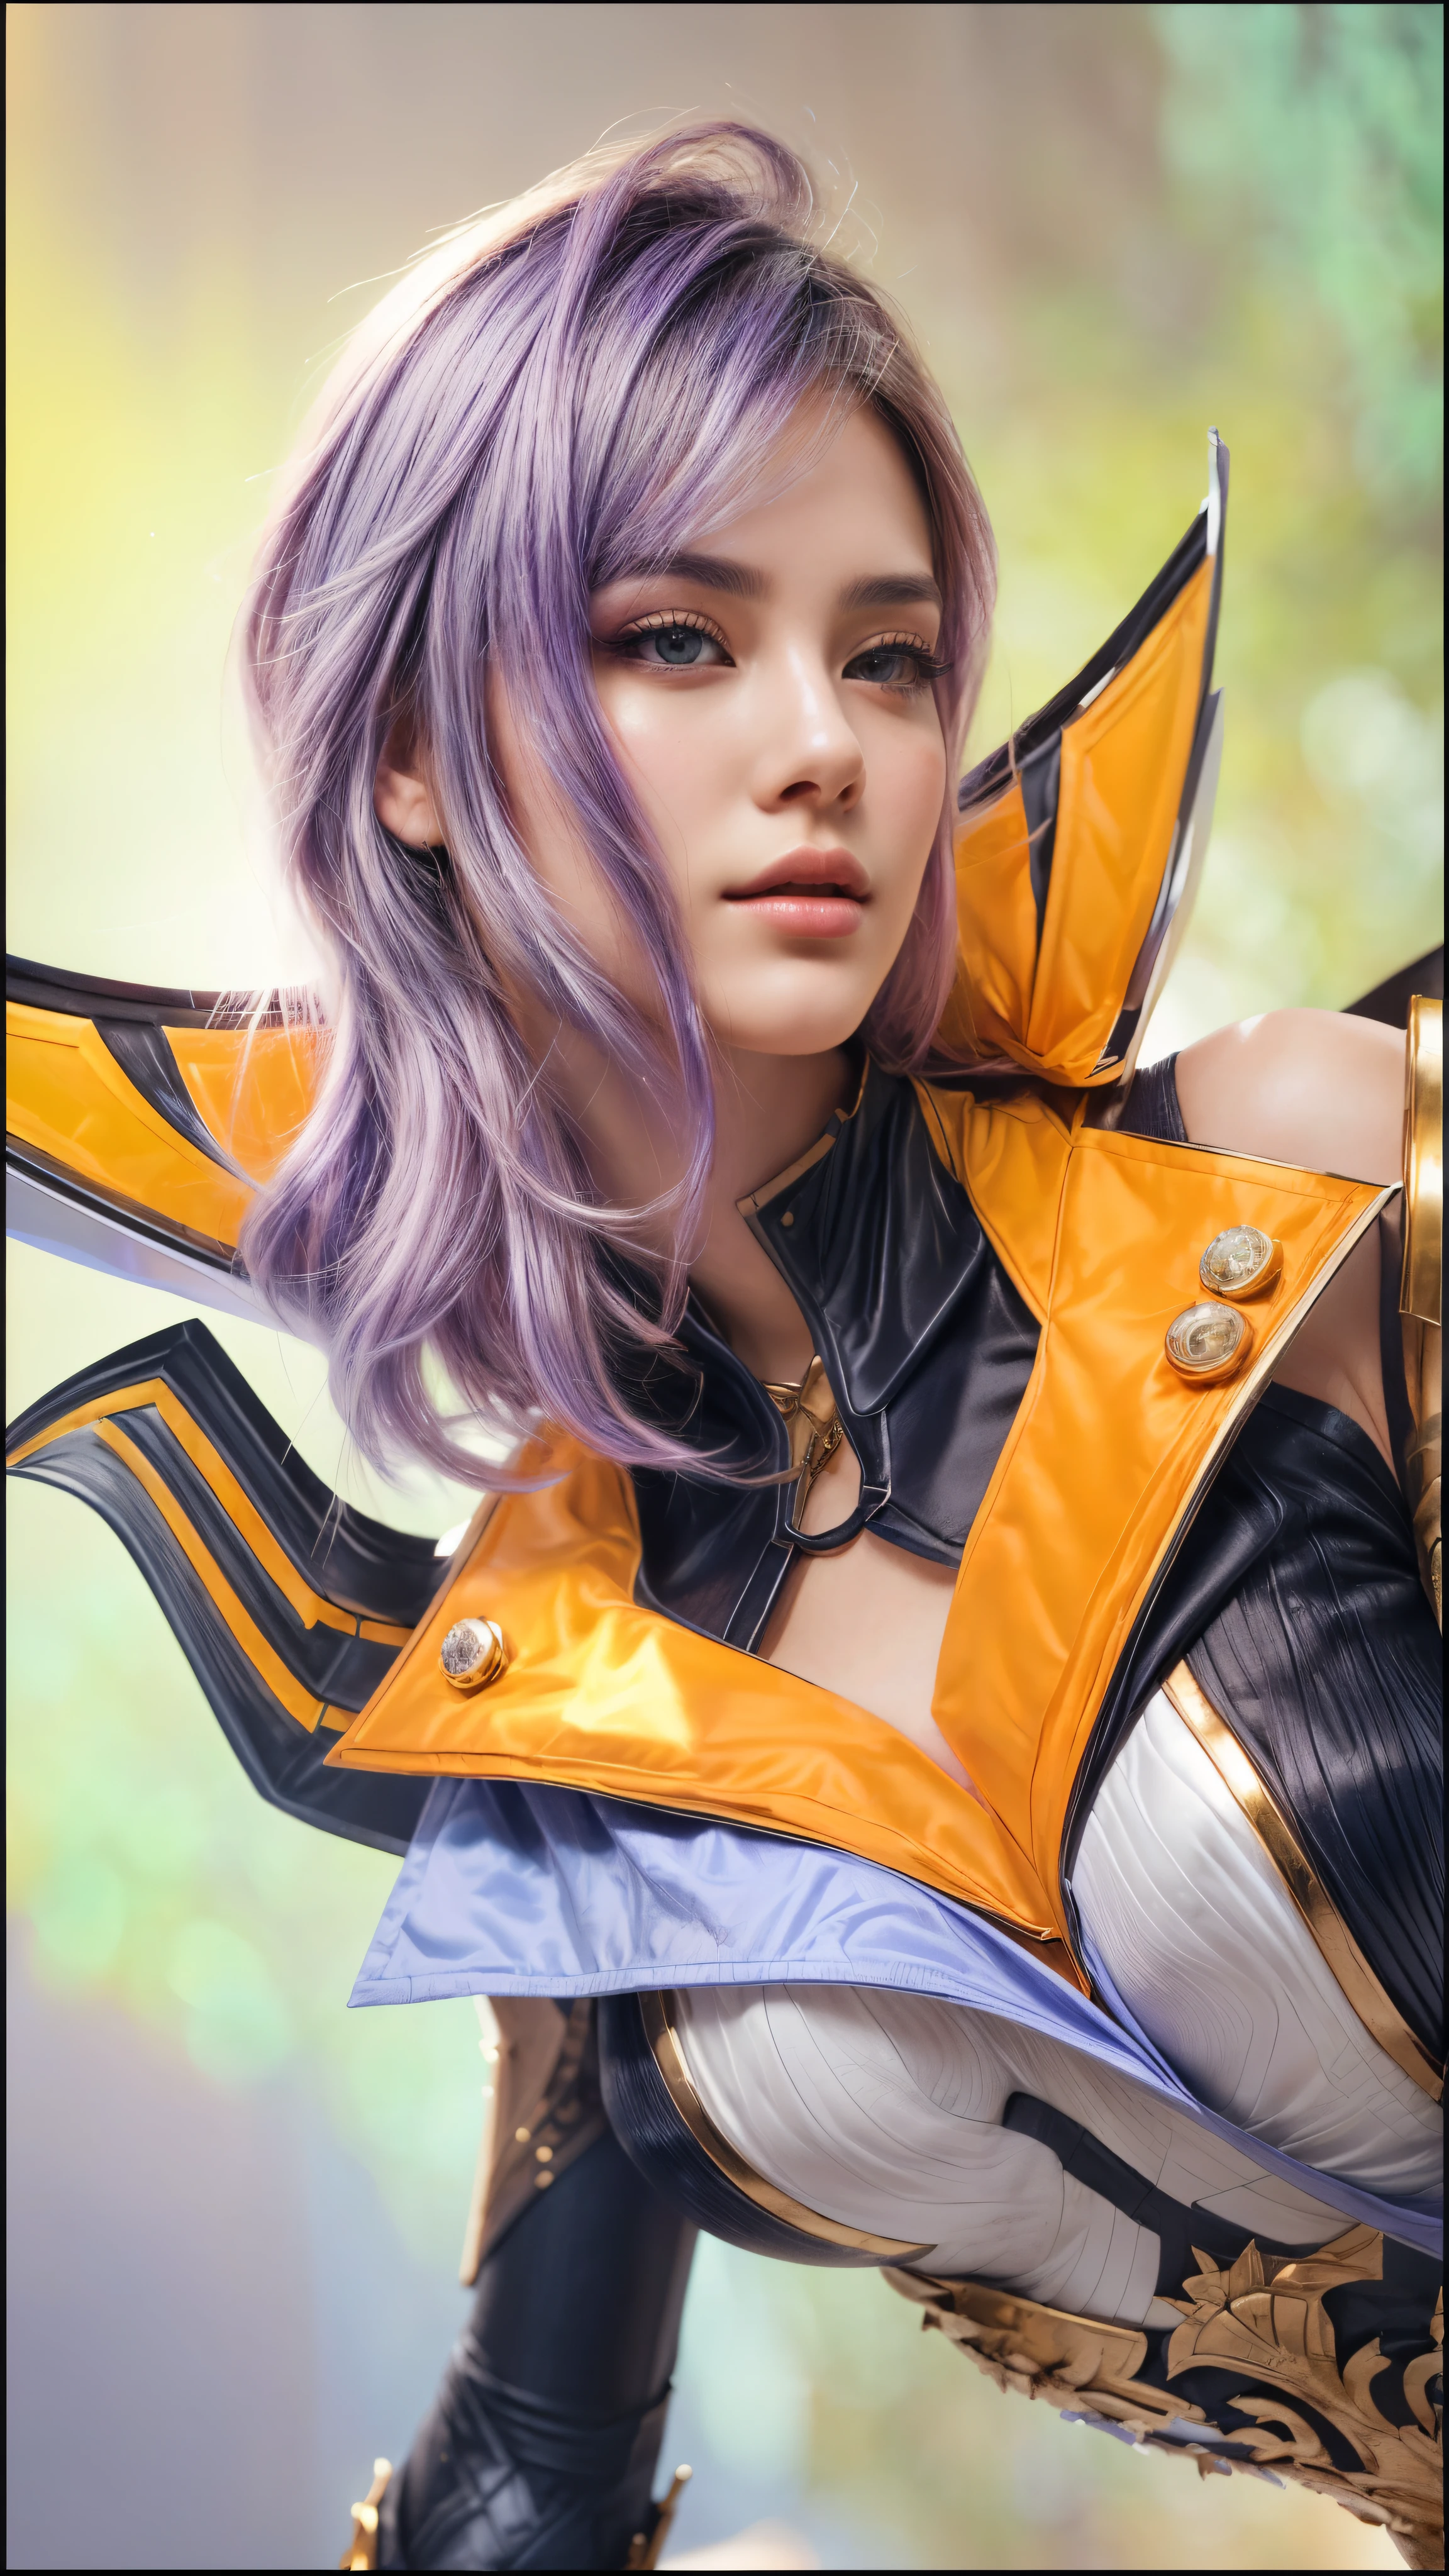 (best quality,4k,highres,ultra-detailed,realistic:1.2),artgerm style,close-up portrait of a woman with vibrant purple hair,exquisite details in the woman's features,gleaming eyes,perfectly contoured lips,purple hair flowing in luscious waves,elaborate artgerm-inspired art style,g liulian art style elements blended in effortlessly,meticulously crafted facial features,expressive eyes with captivating depth,artistic rendering of the woman's face and skin,gently flushed cheeks with a subtle radiance,elegant and confident expression,artfully composed framing highlighting the woman's face,soft,even lighting casting a gentle glow on her skin,a mesmerizing blend of realistic and dreamlike aesthetics,KDA-inspired elements complementing the overall composition,a touch of fantasy and mystique in the atmosphere,a beautiful fusion of artgerm and dreamlike renderings,captivating character with a touch of anime charm,meticulously rendered details capturing the essence of the Knights of the Zodiac girl's character,a stunning portrayal of the woman embodying strength and grace,rich and vivid colors adding depth and vibrancy to the artwork,a masterful creation showcasing the artistry of artgerm and g liulian.